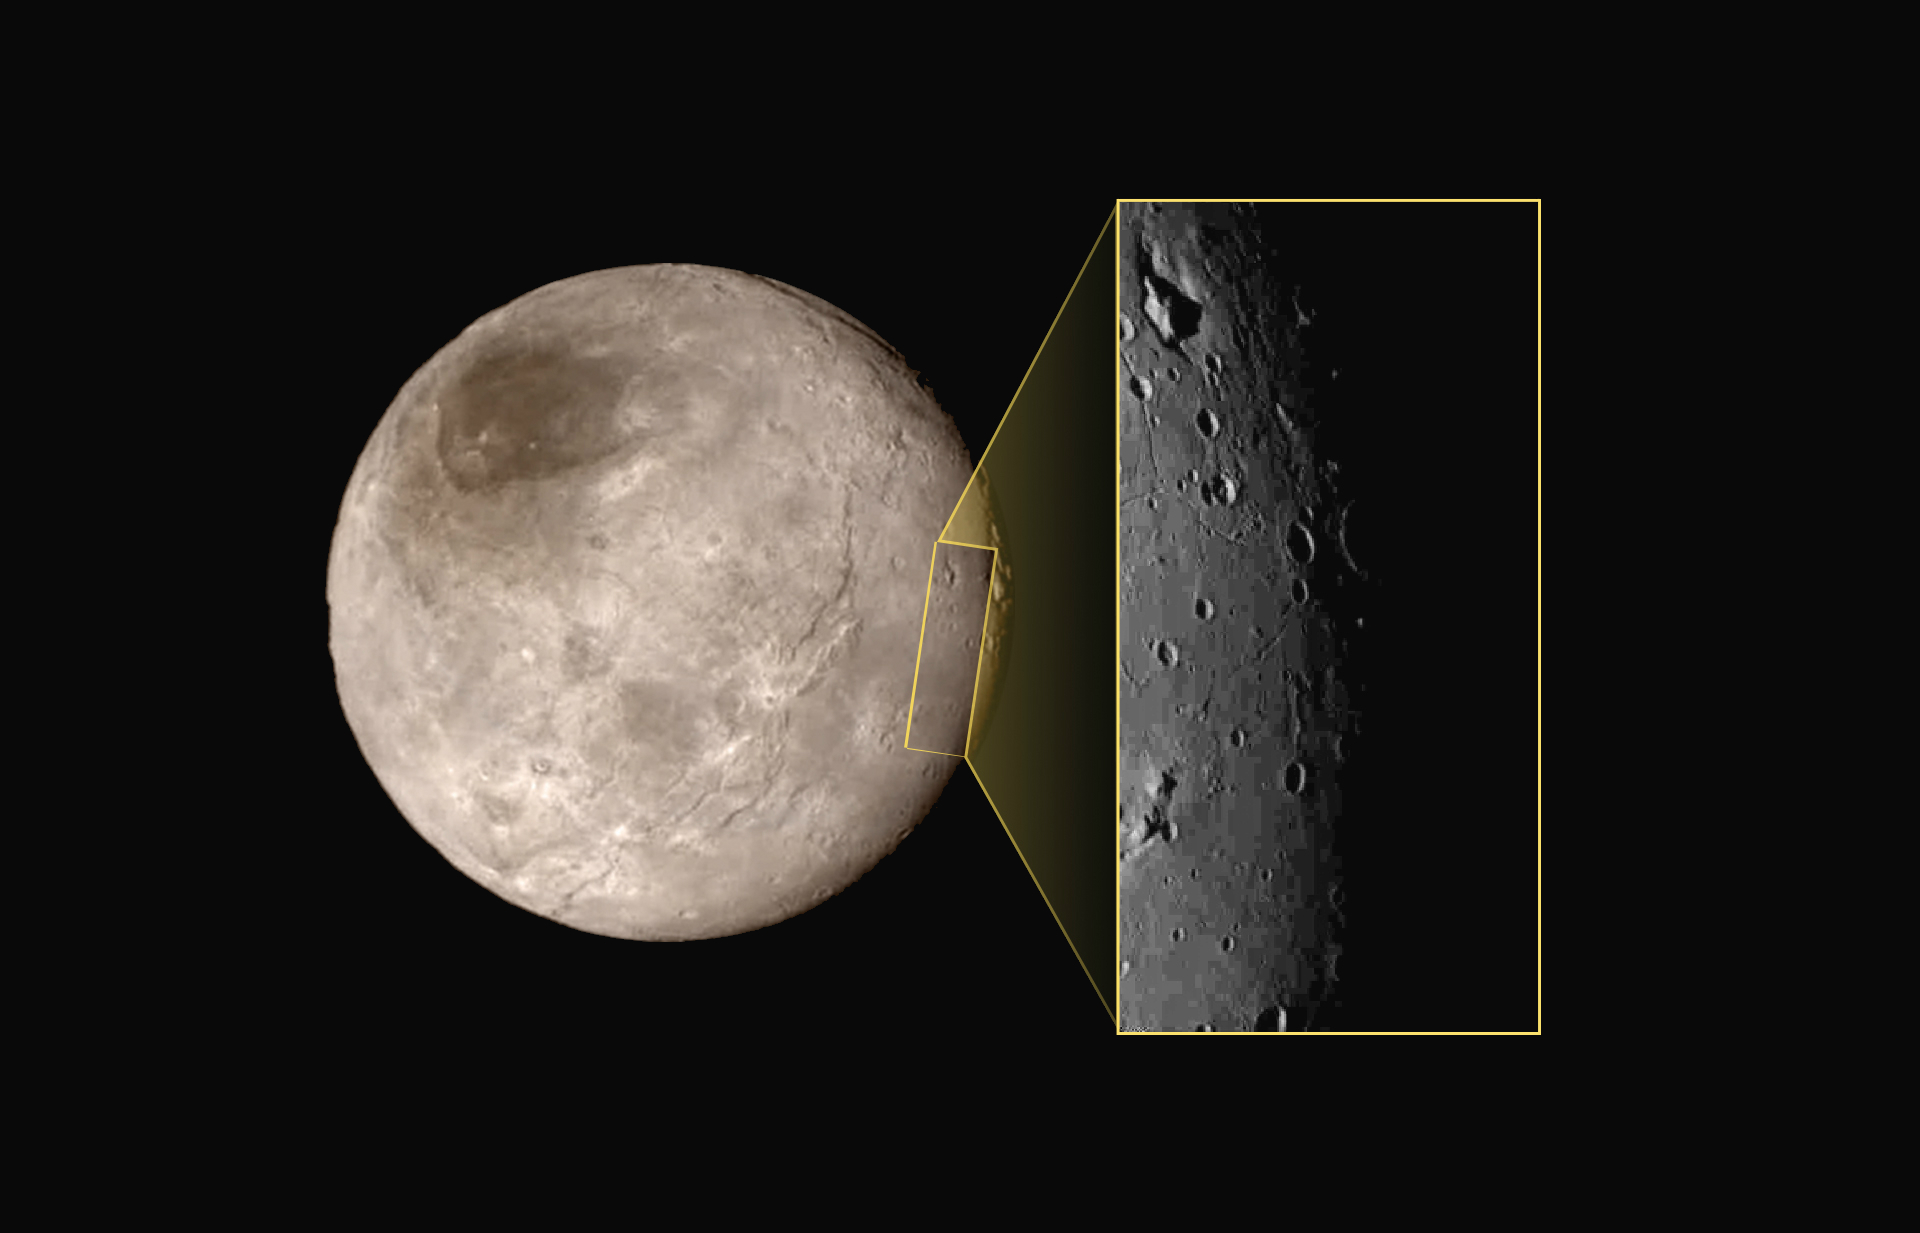 New image of an area on Pluto's largest moon Charon